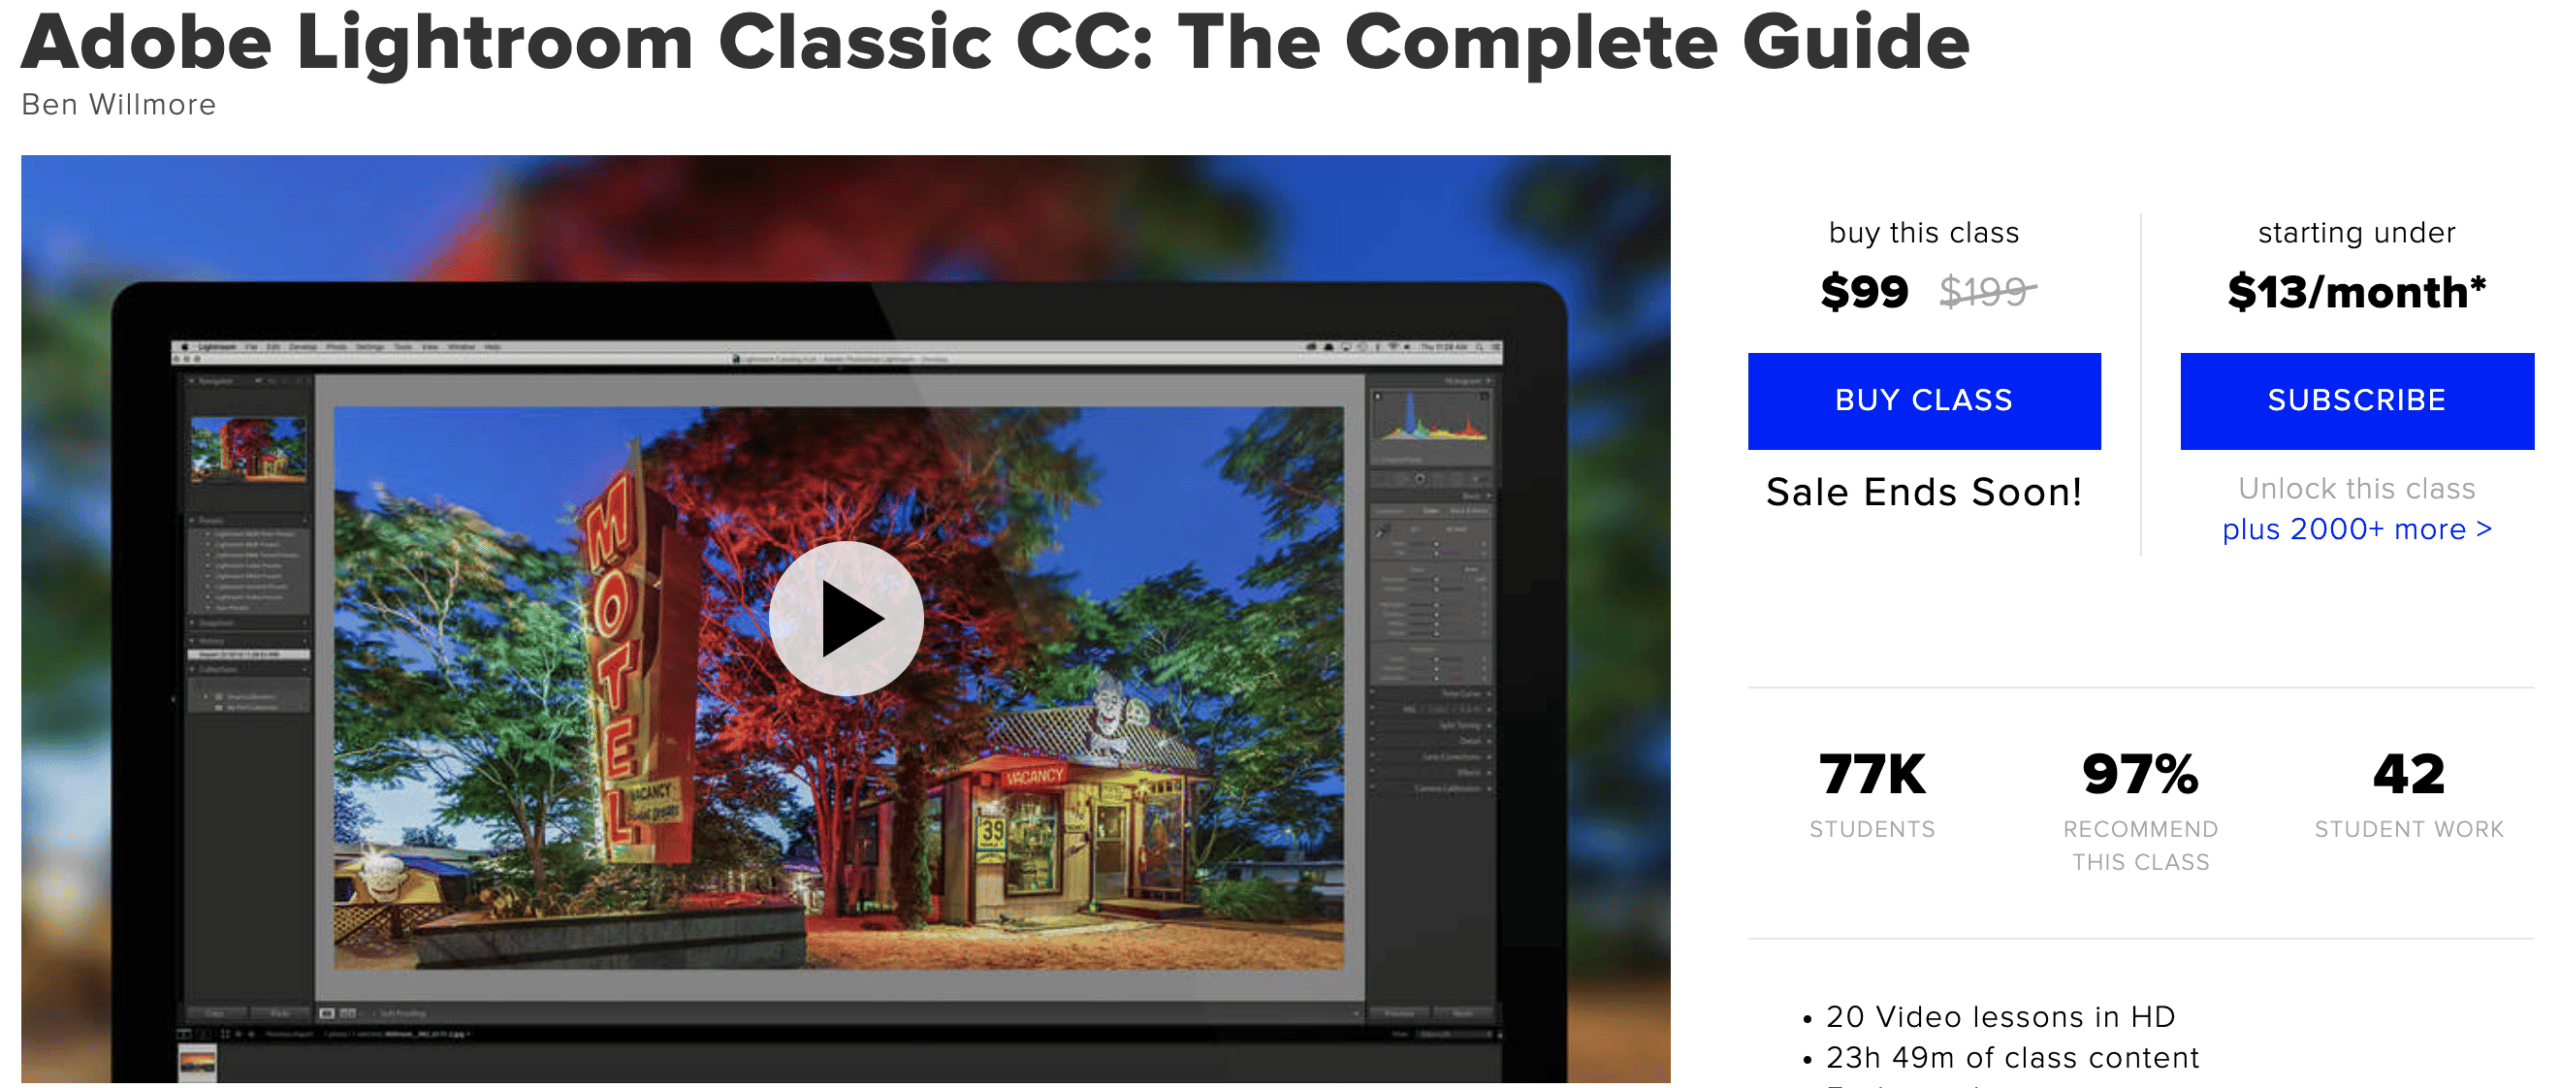 CreativeLive Adobe Lightroom Classic CC: The Complete Guide screenshot